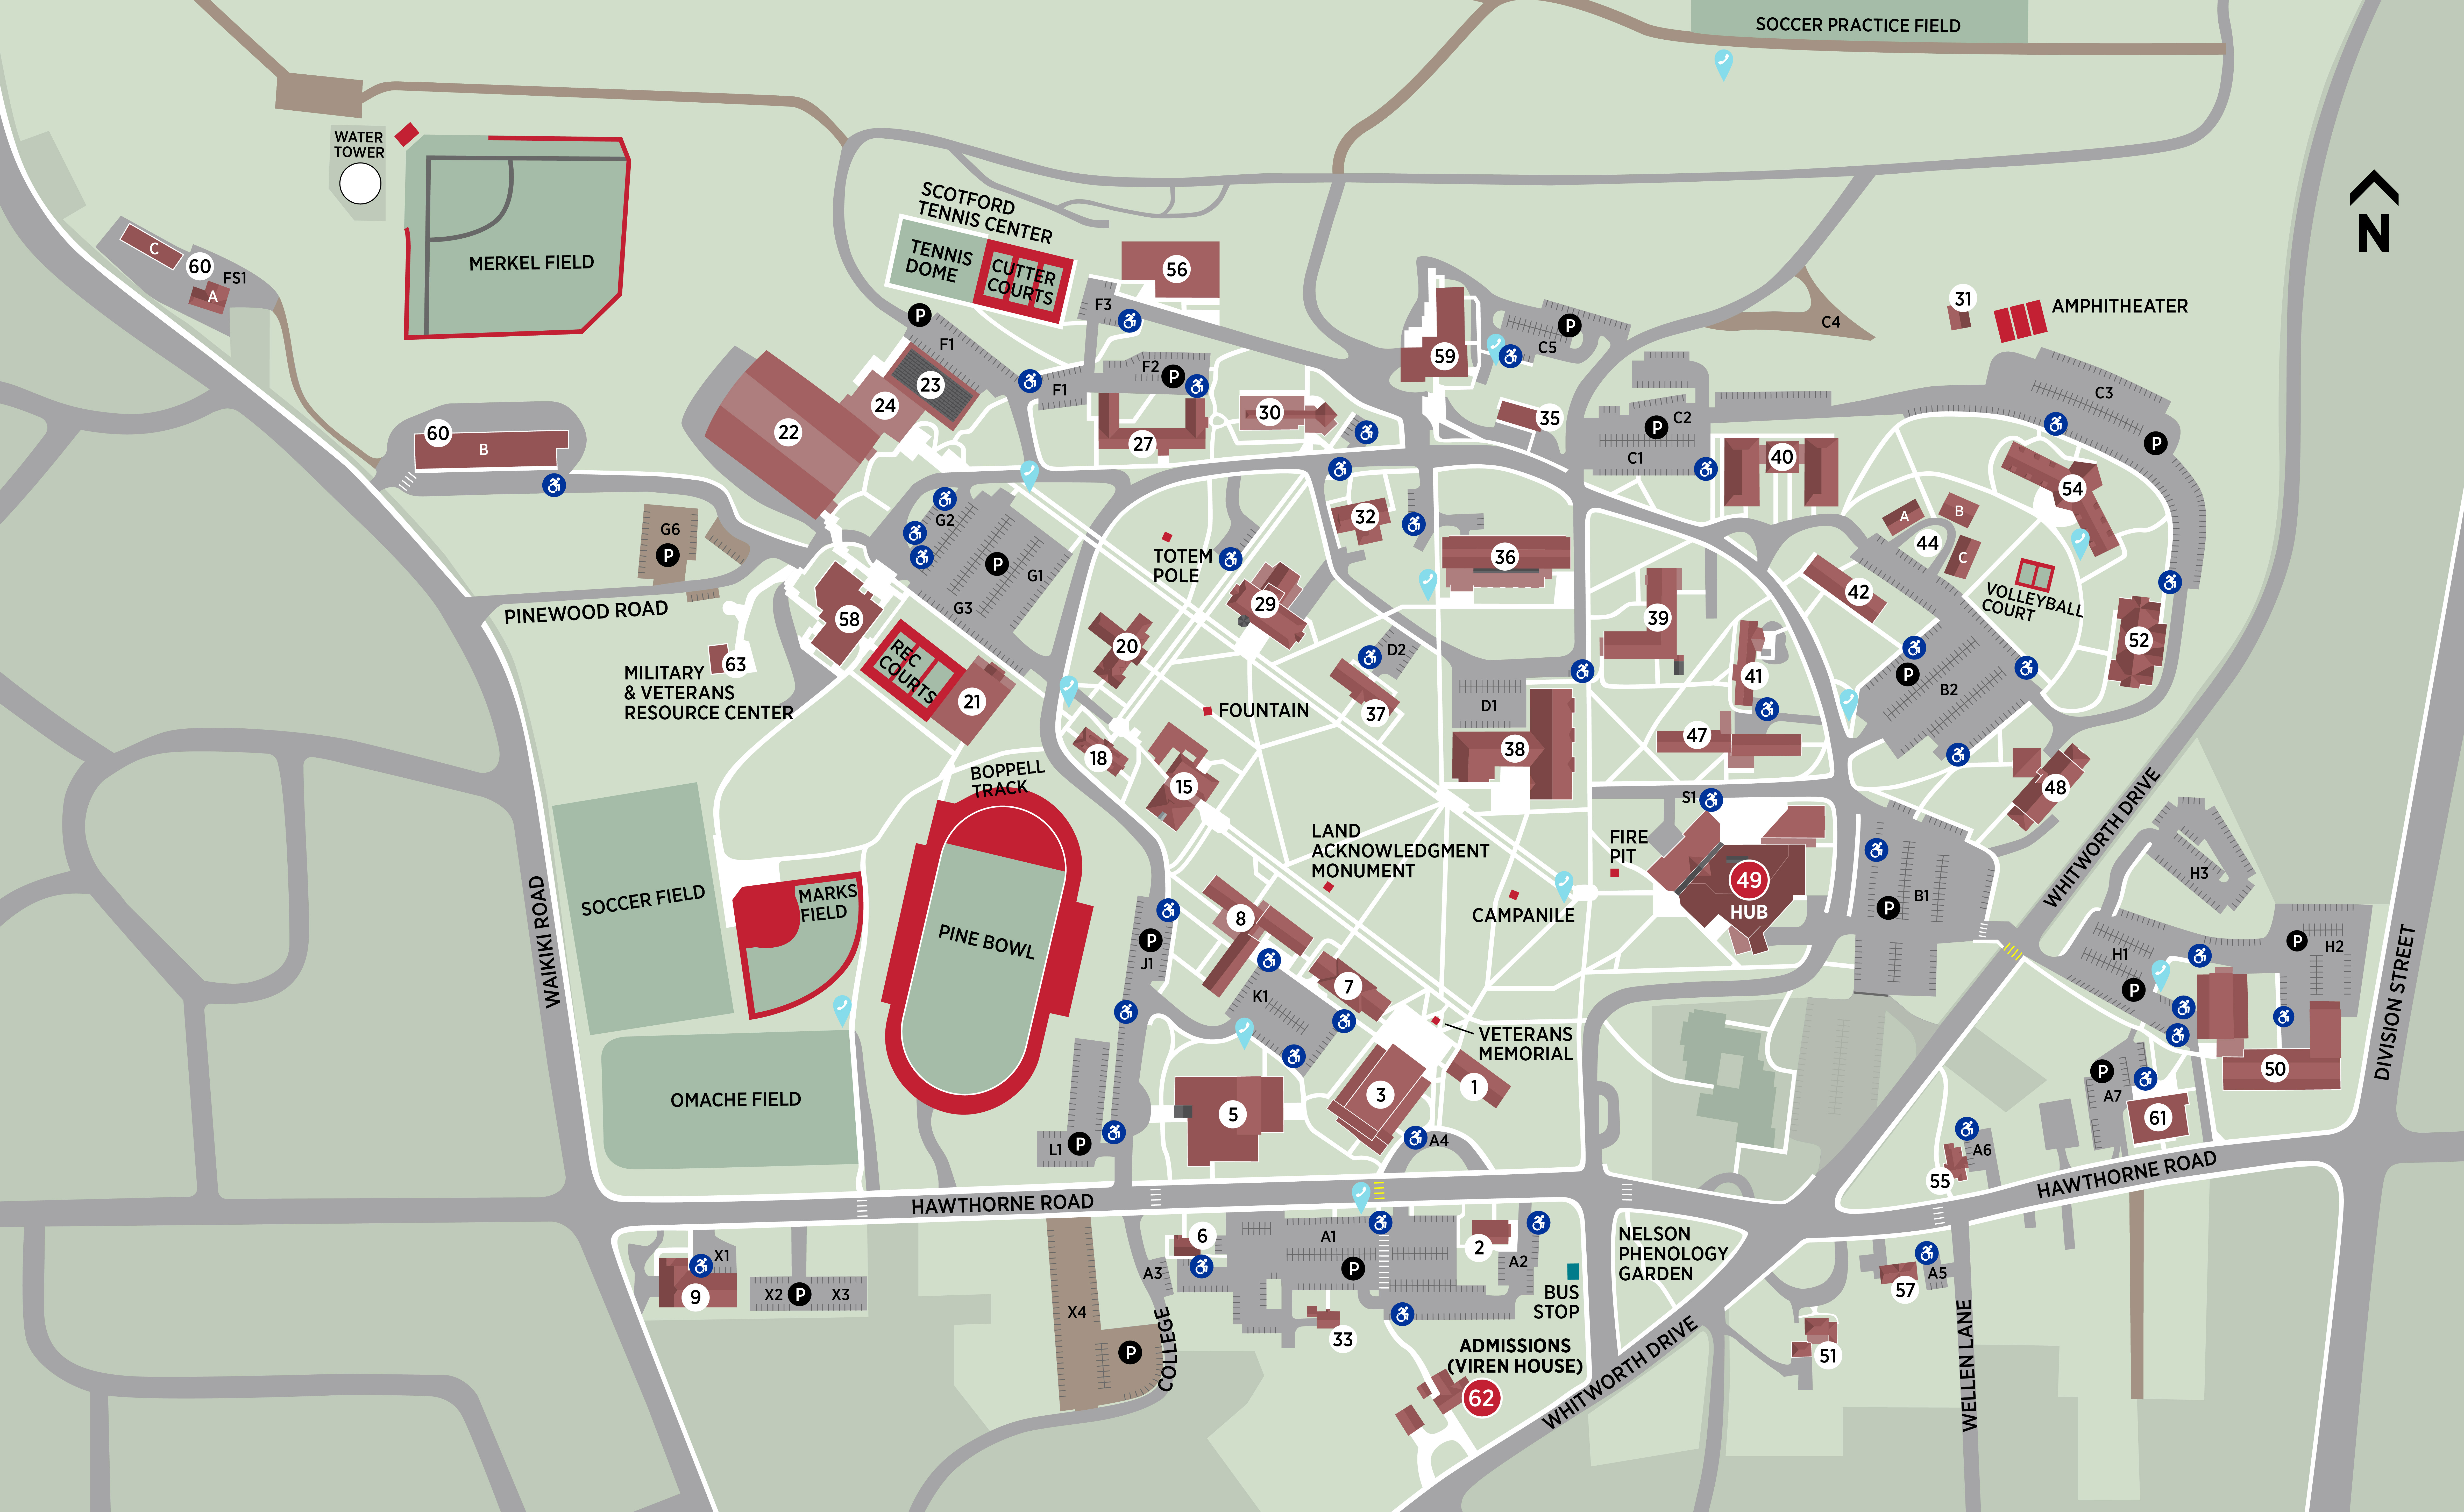 Map of Whitworth's campus